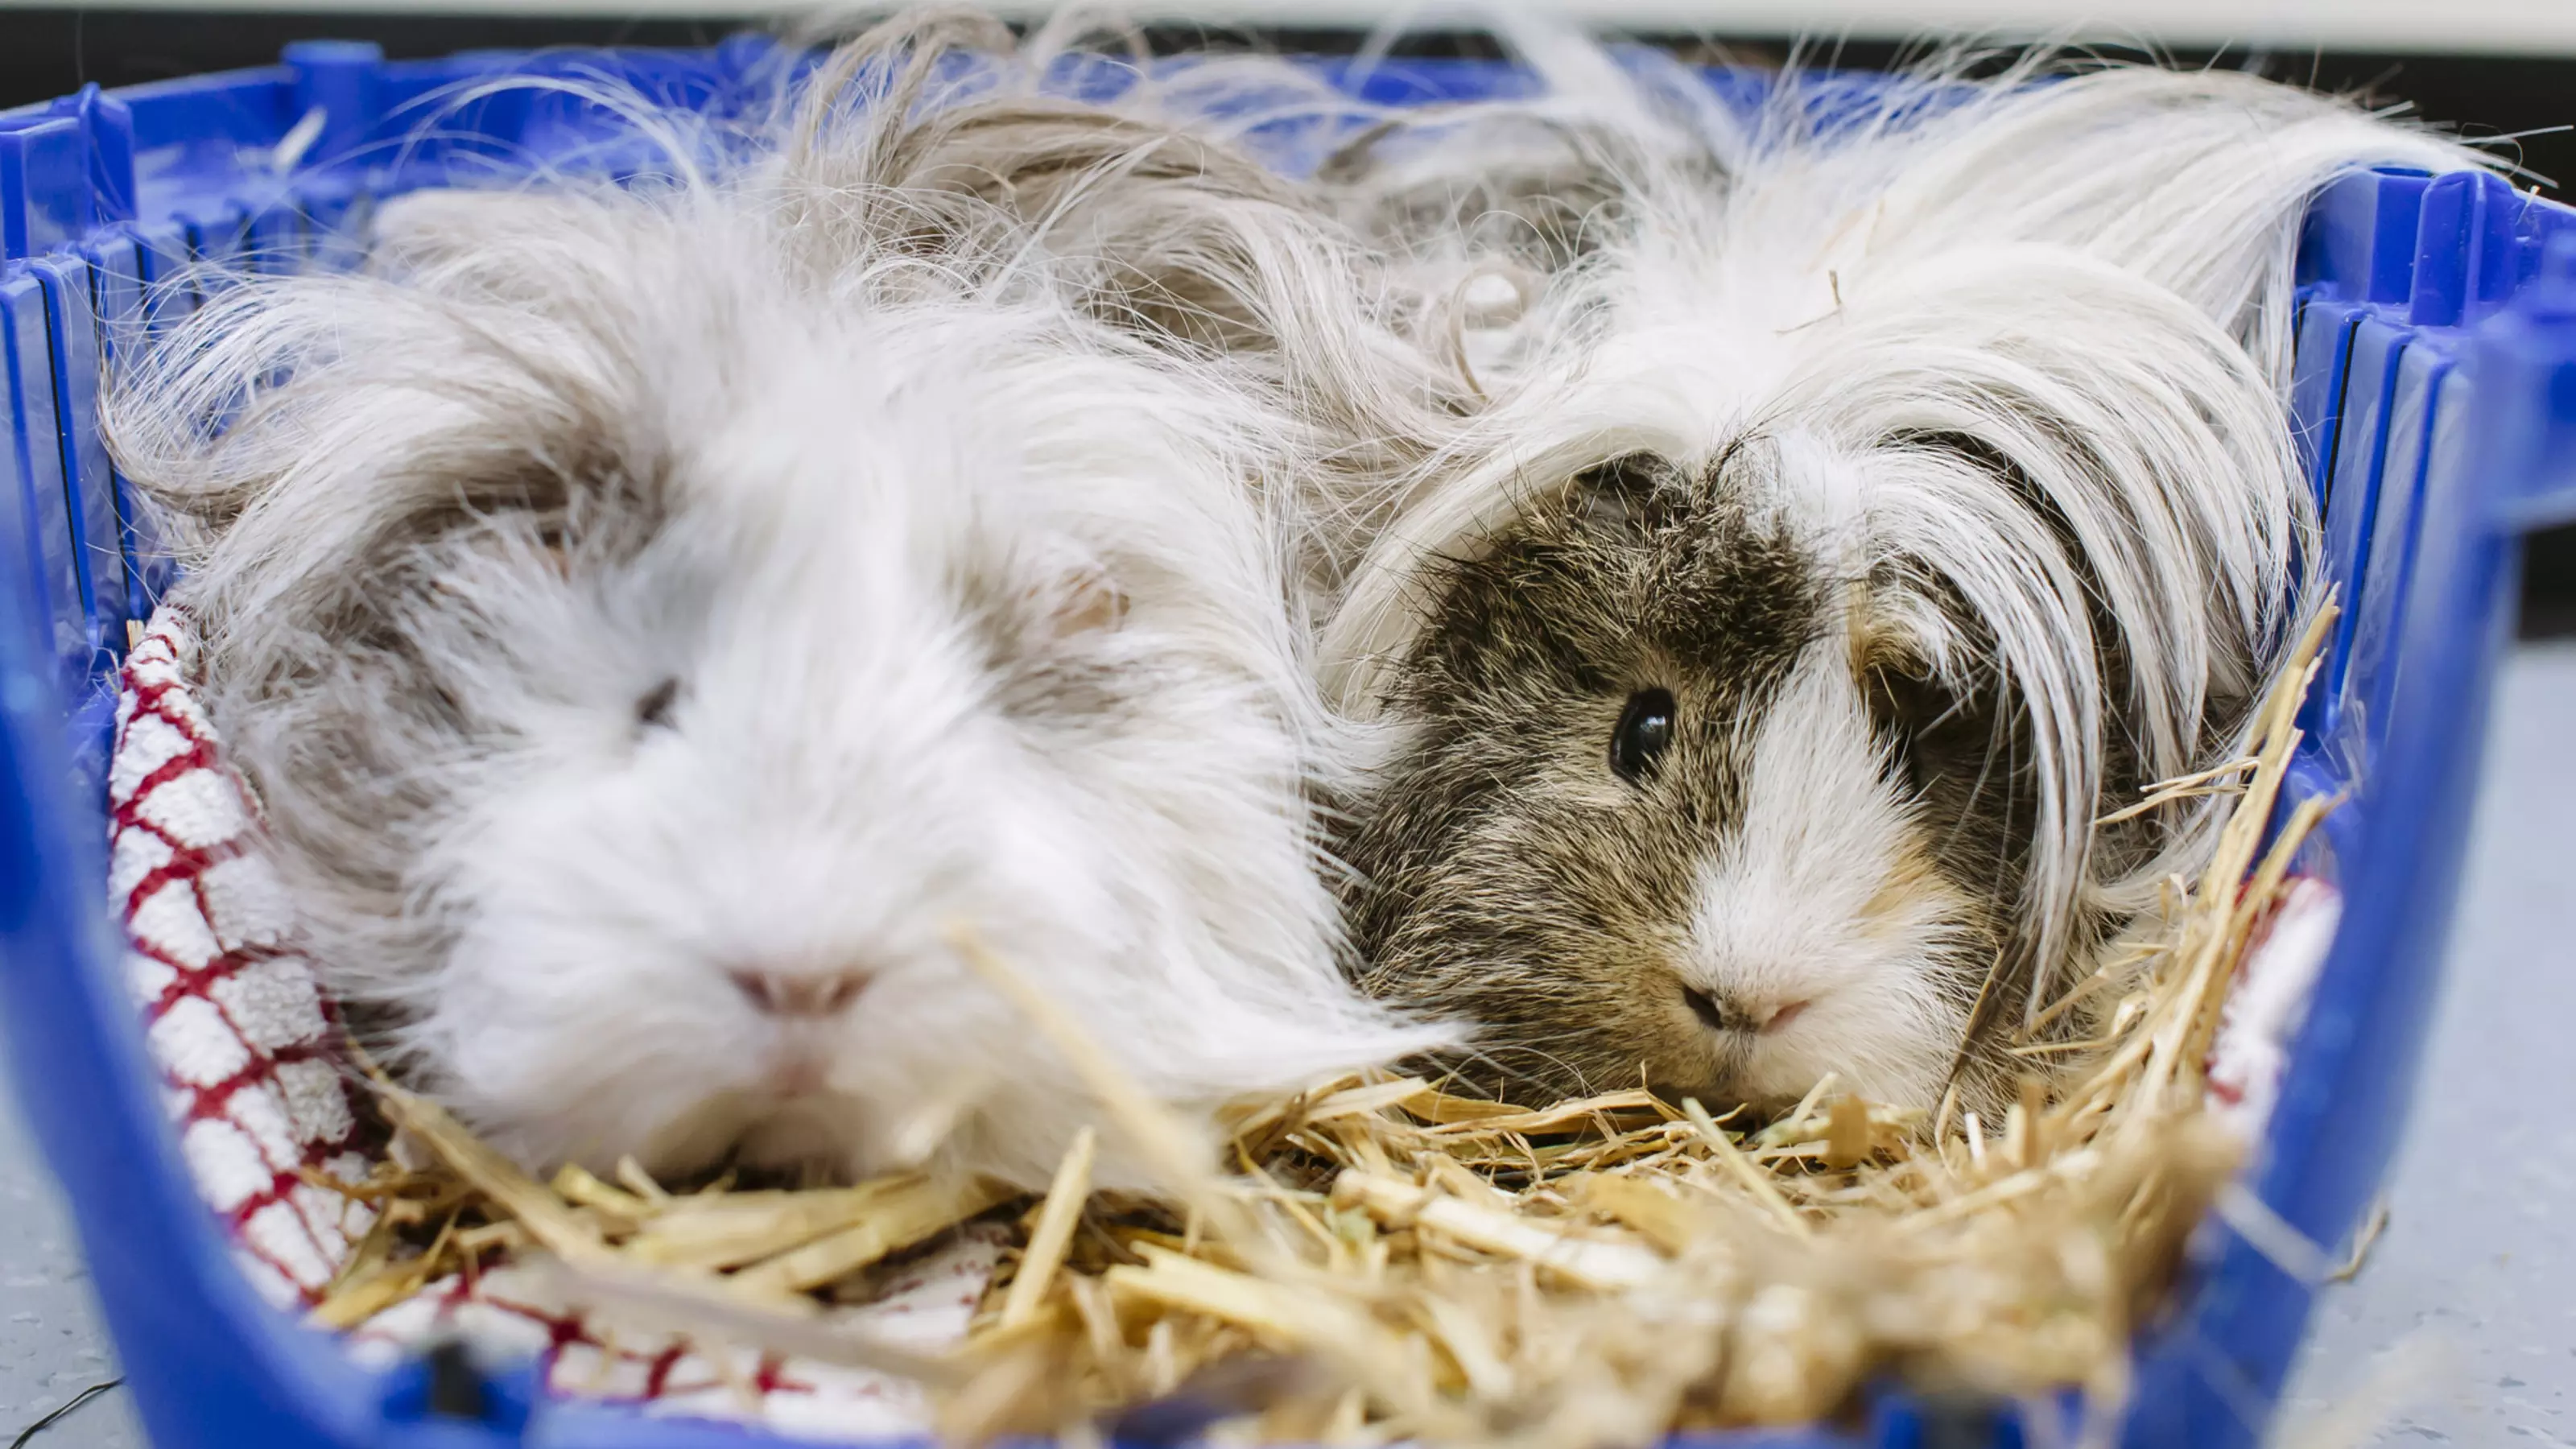 Two guinea pigs sitting together